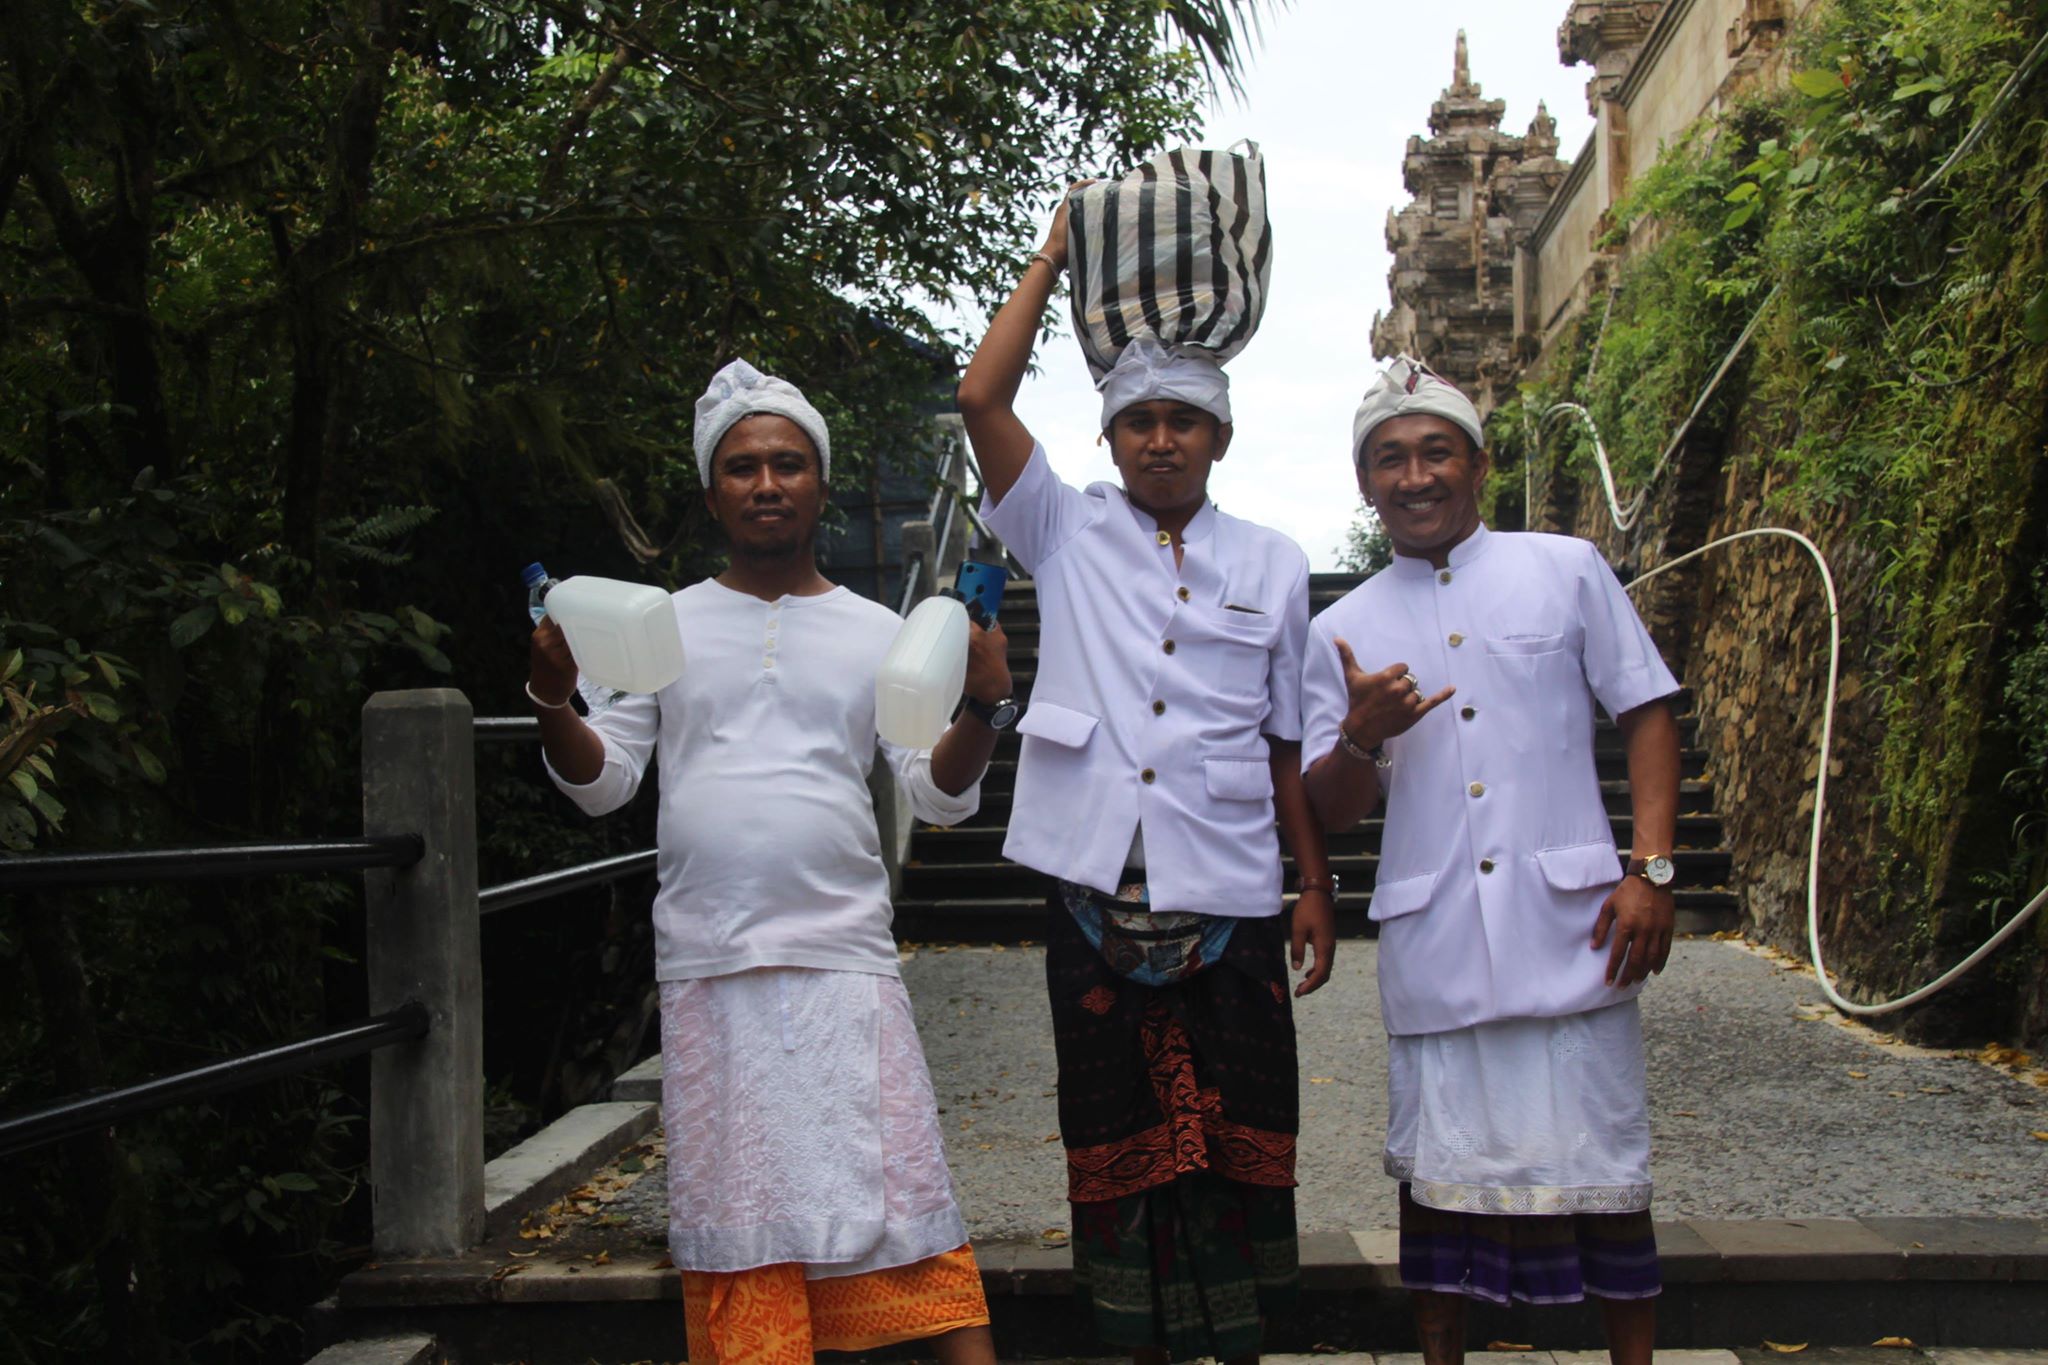 Kadek with his holy water, Tapik with the Offerings and Gede. All at Lempuyang Temple